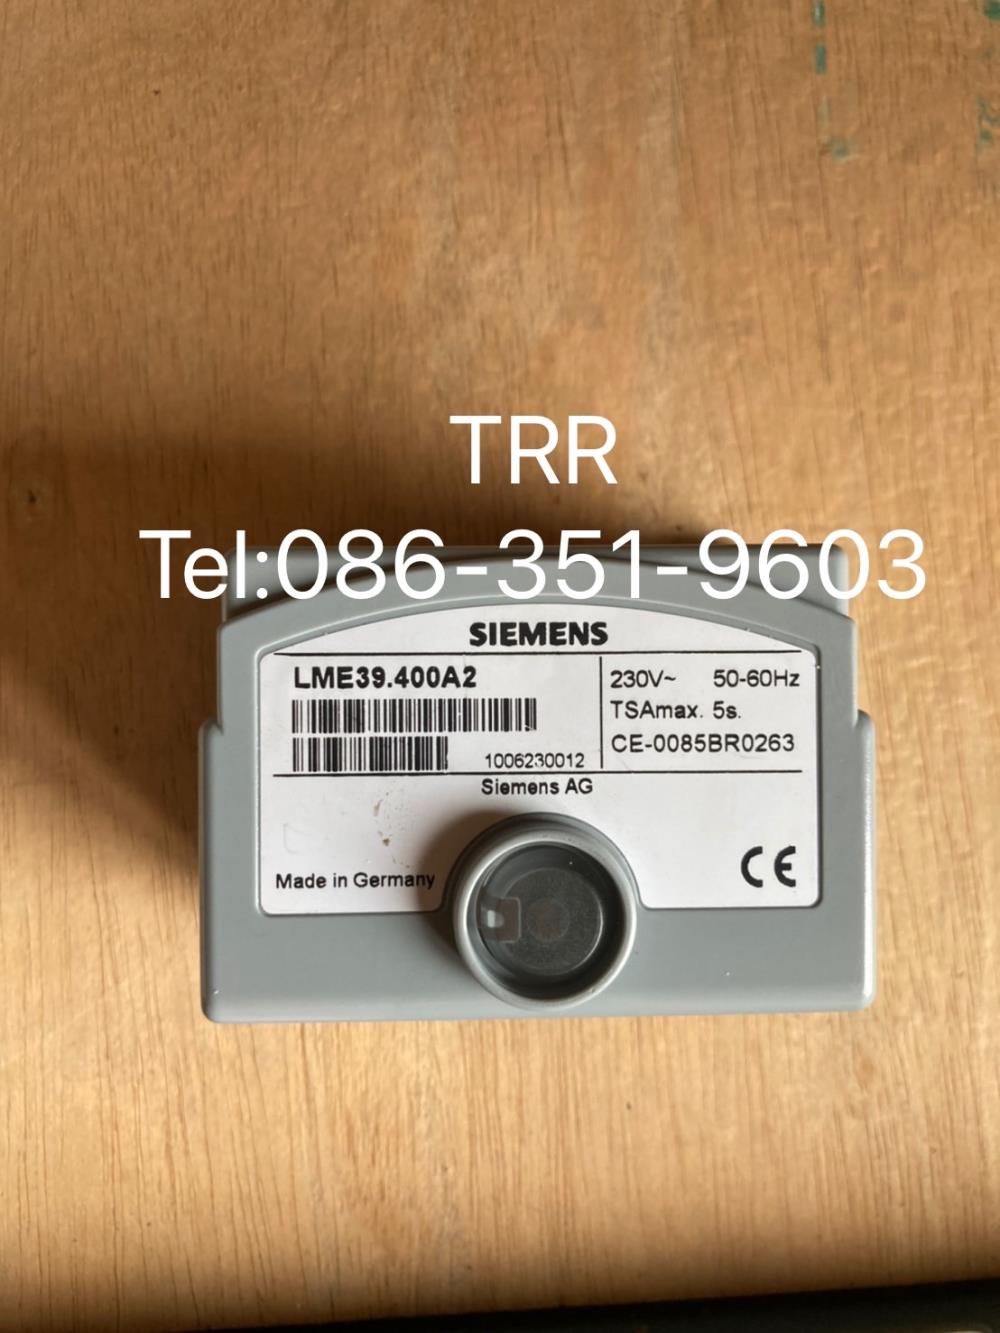 Siemens LME39.400A2,Siemens LME39.400A2,Siemens LME39.400A2,Instruments and Controls/Controllers